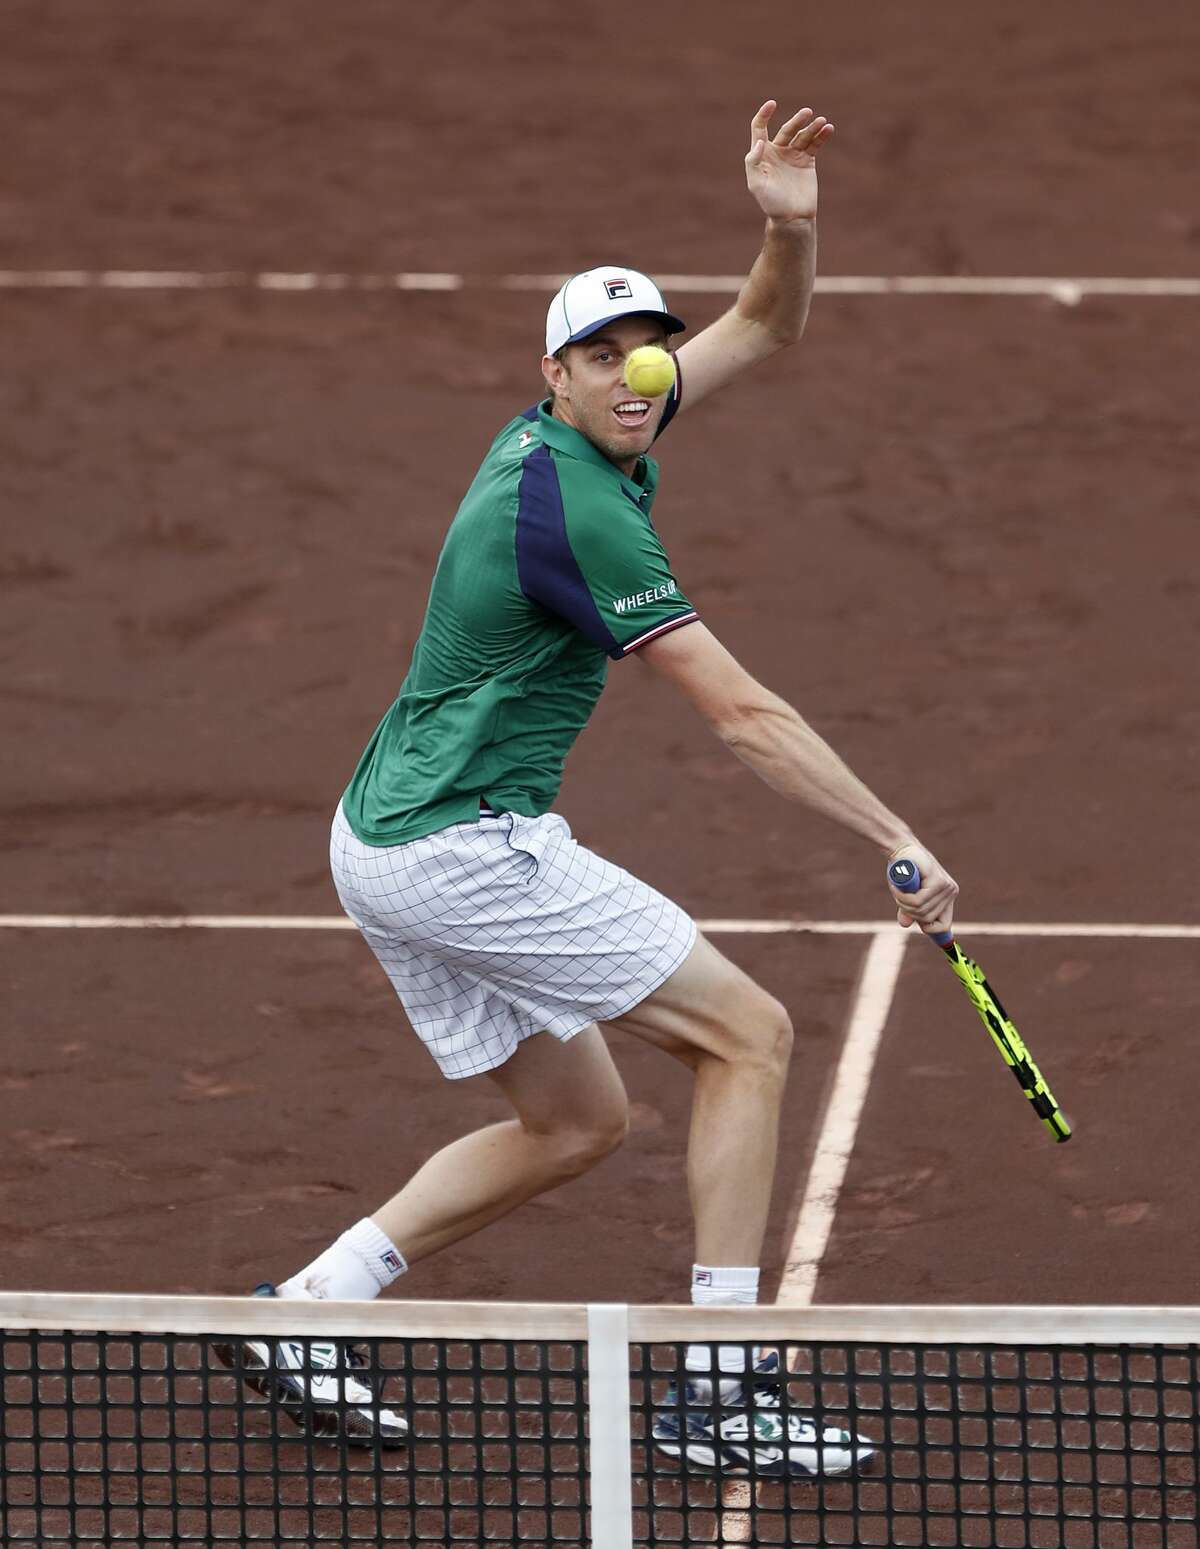 Sam Querrey plays doubles with Kevin Anderson against Brian Baker and Nikola Mektic at the 2017 Fayez Sarofim & Co. U.S. Men's Clay Court Championship at the River Oaks Country Club, Wednesday, April 12, 2017, in Houston. ( Karen Warren / Houston Chronicle )